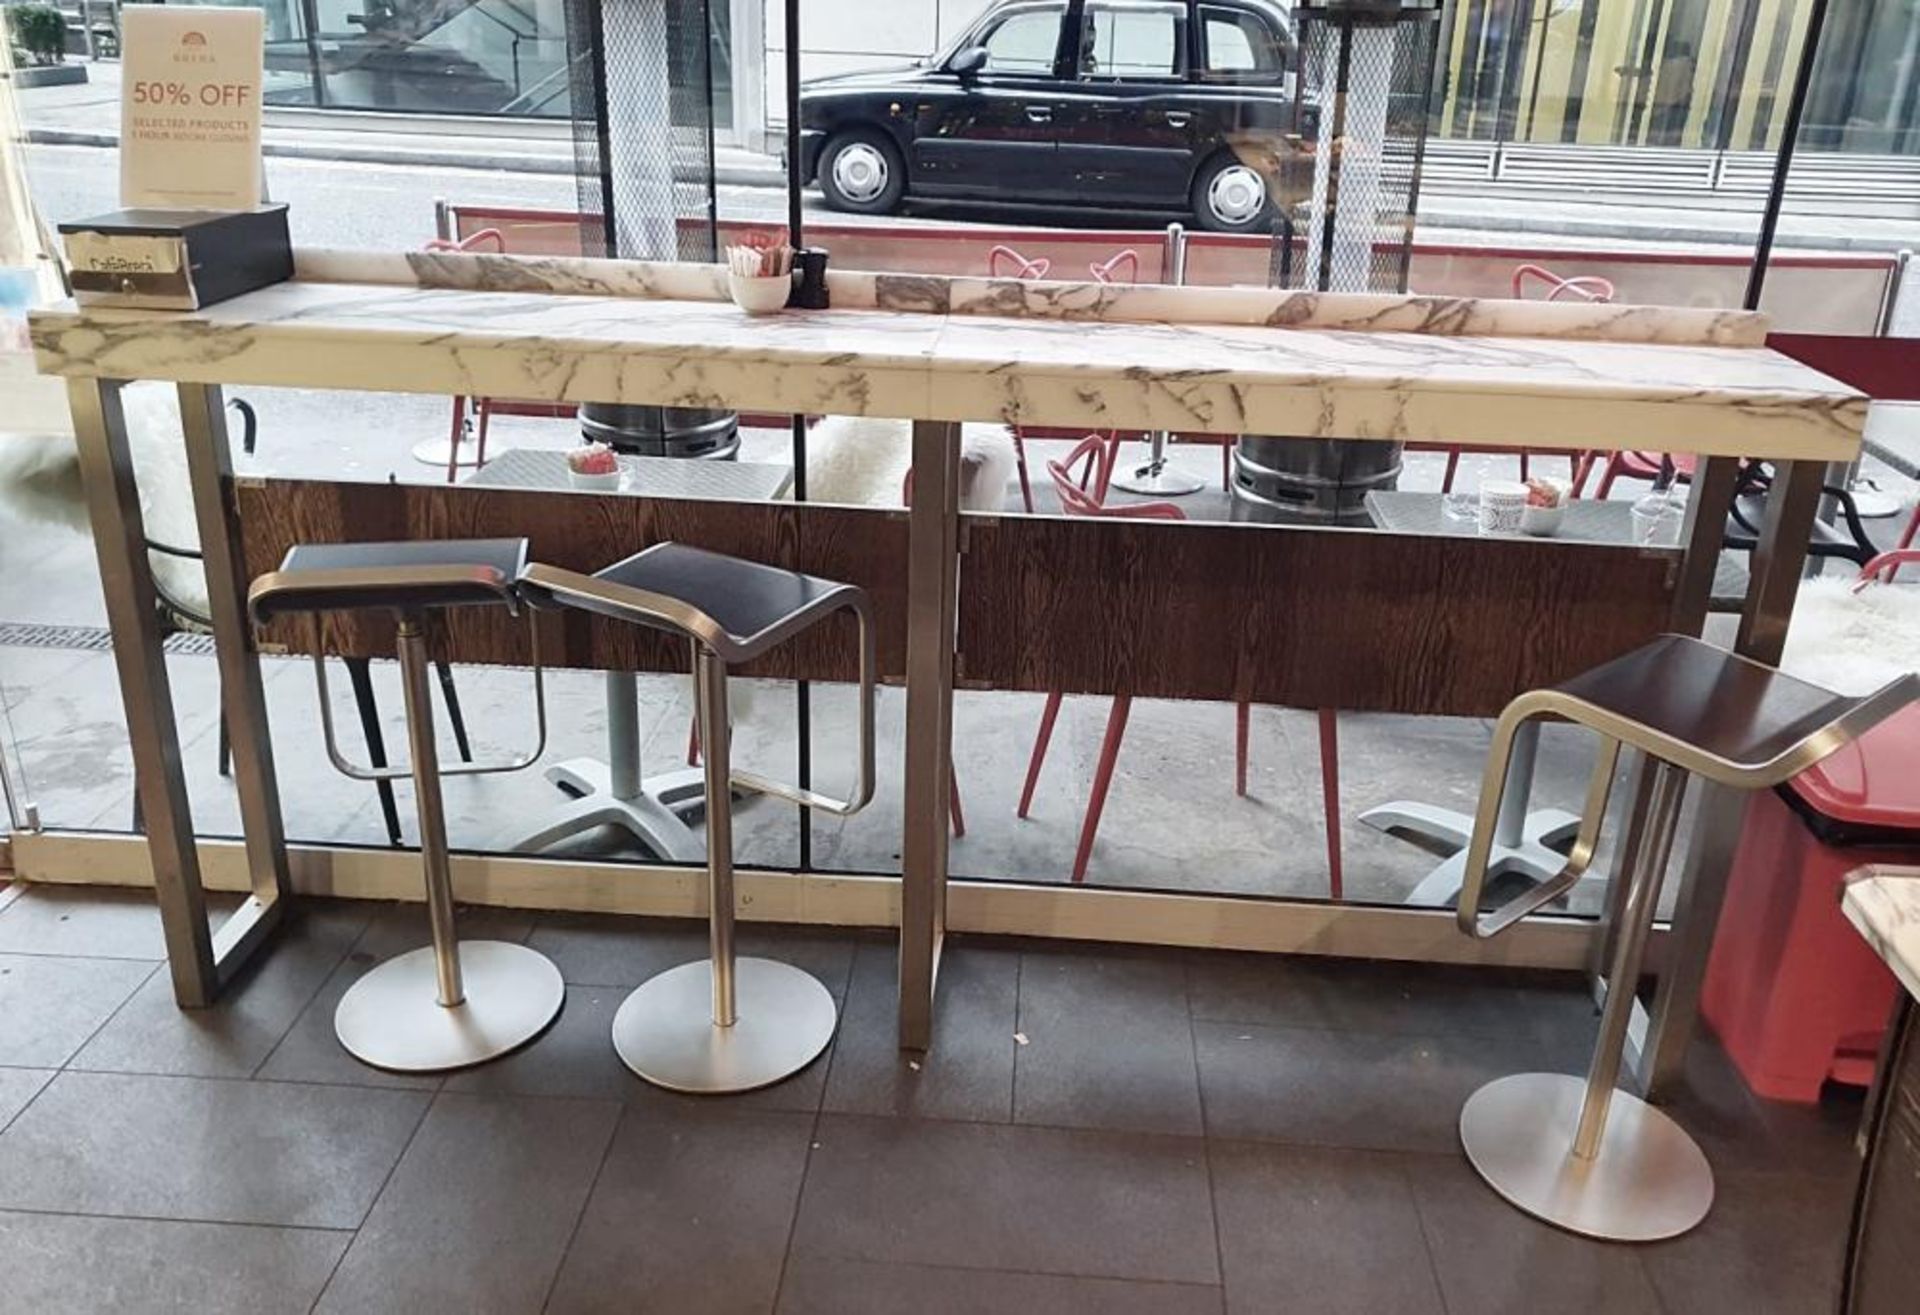 1 x White Marble/Granite Breakfast / Coffee Bar - Two Piece - From A Milan-style City Centre Cafe - Bild 2 aus 4